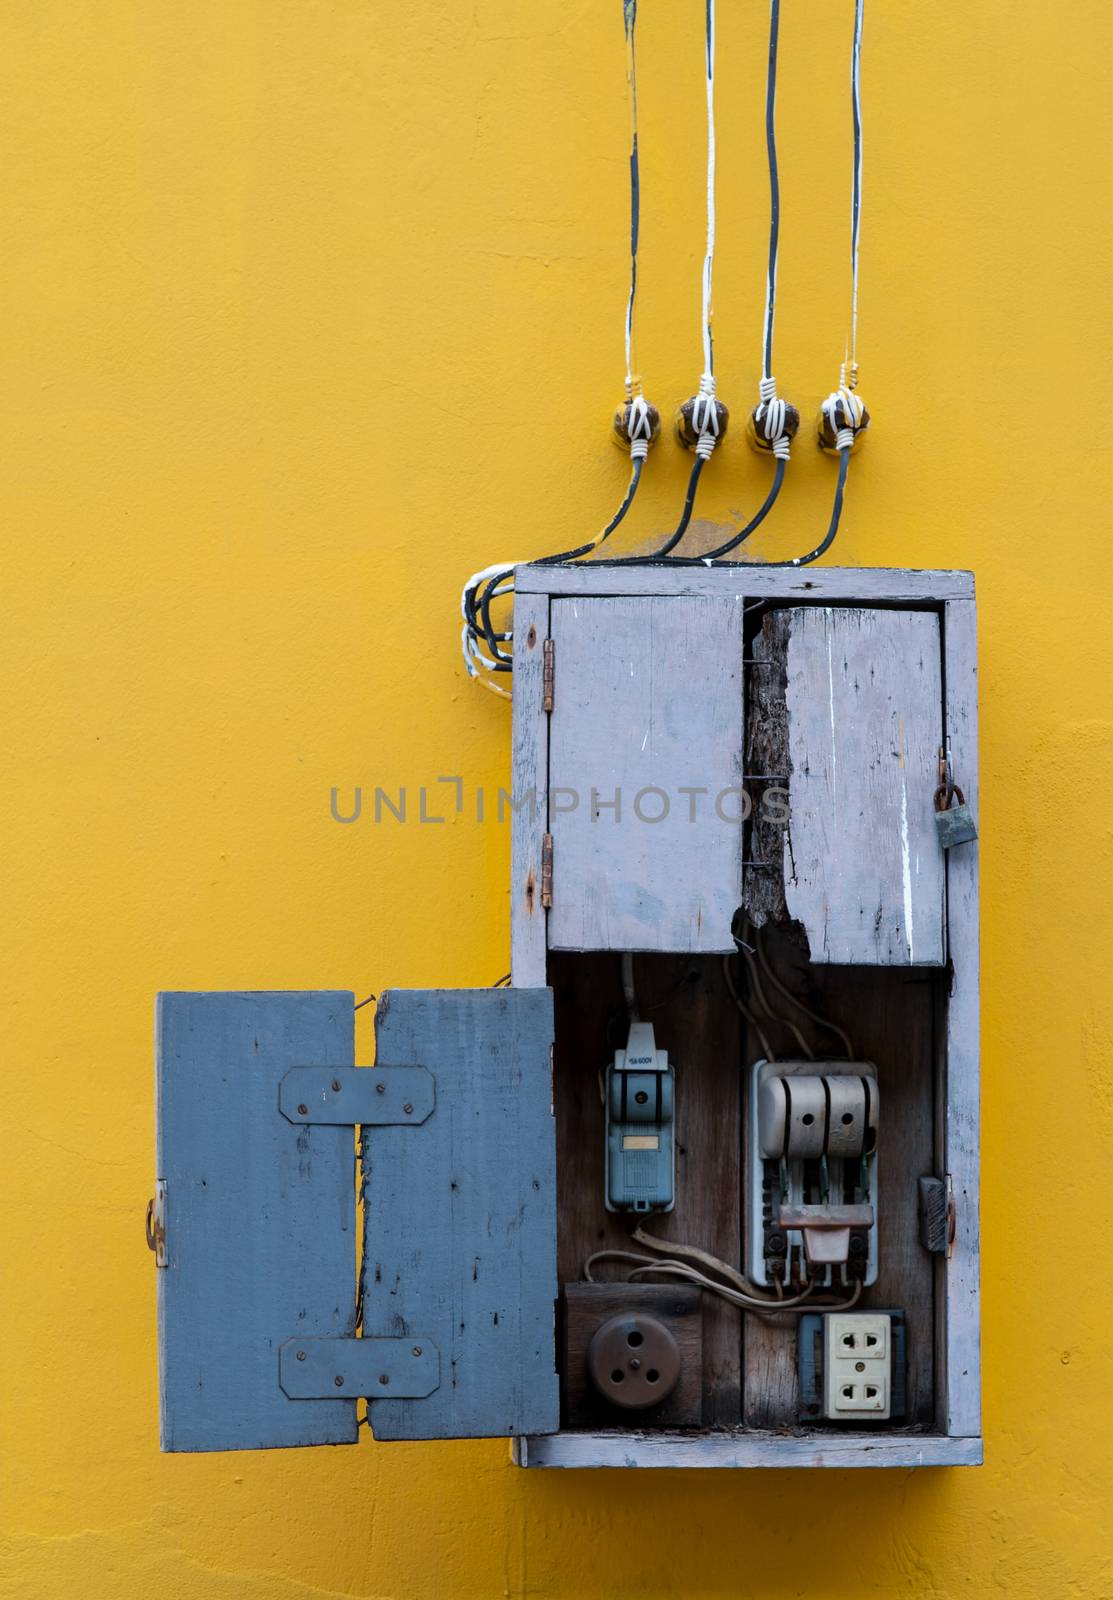 Wooden box, electric control equipment in the factory on yellow vintage concrete wall background. Manual cut out with old design. Safety in home and factory industrial concept.